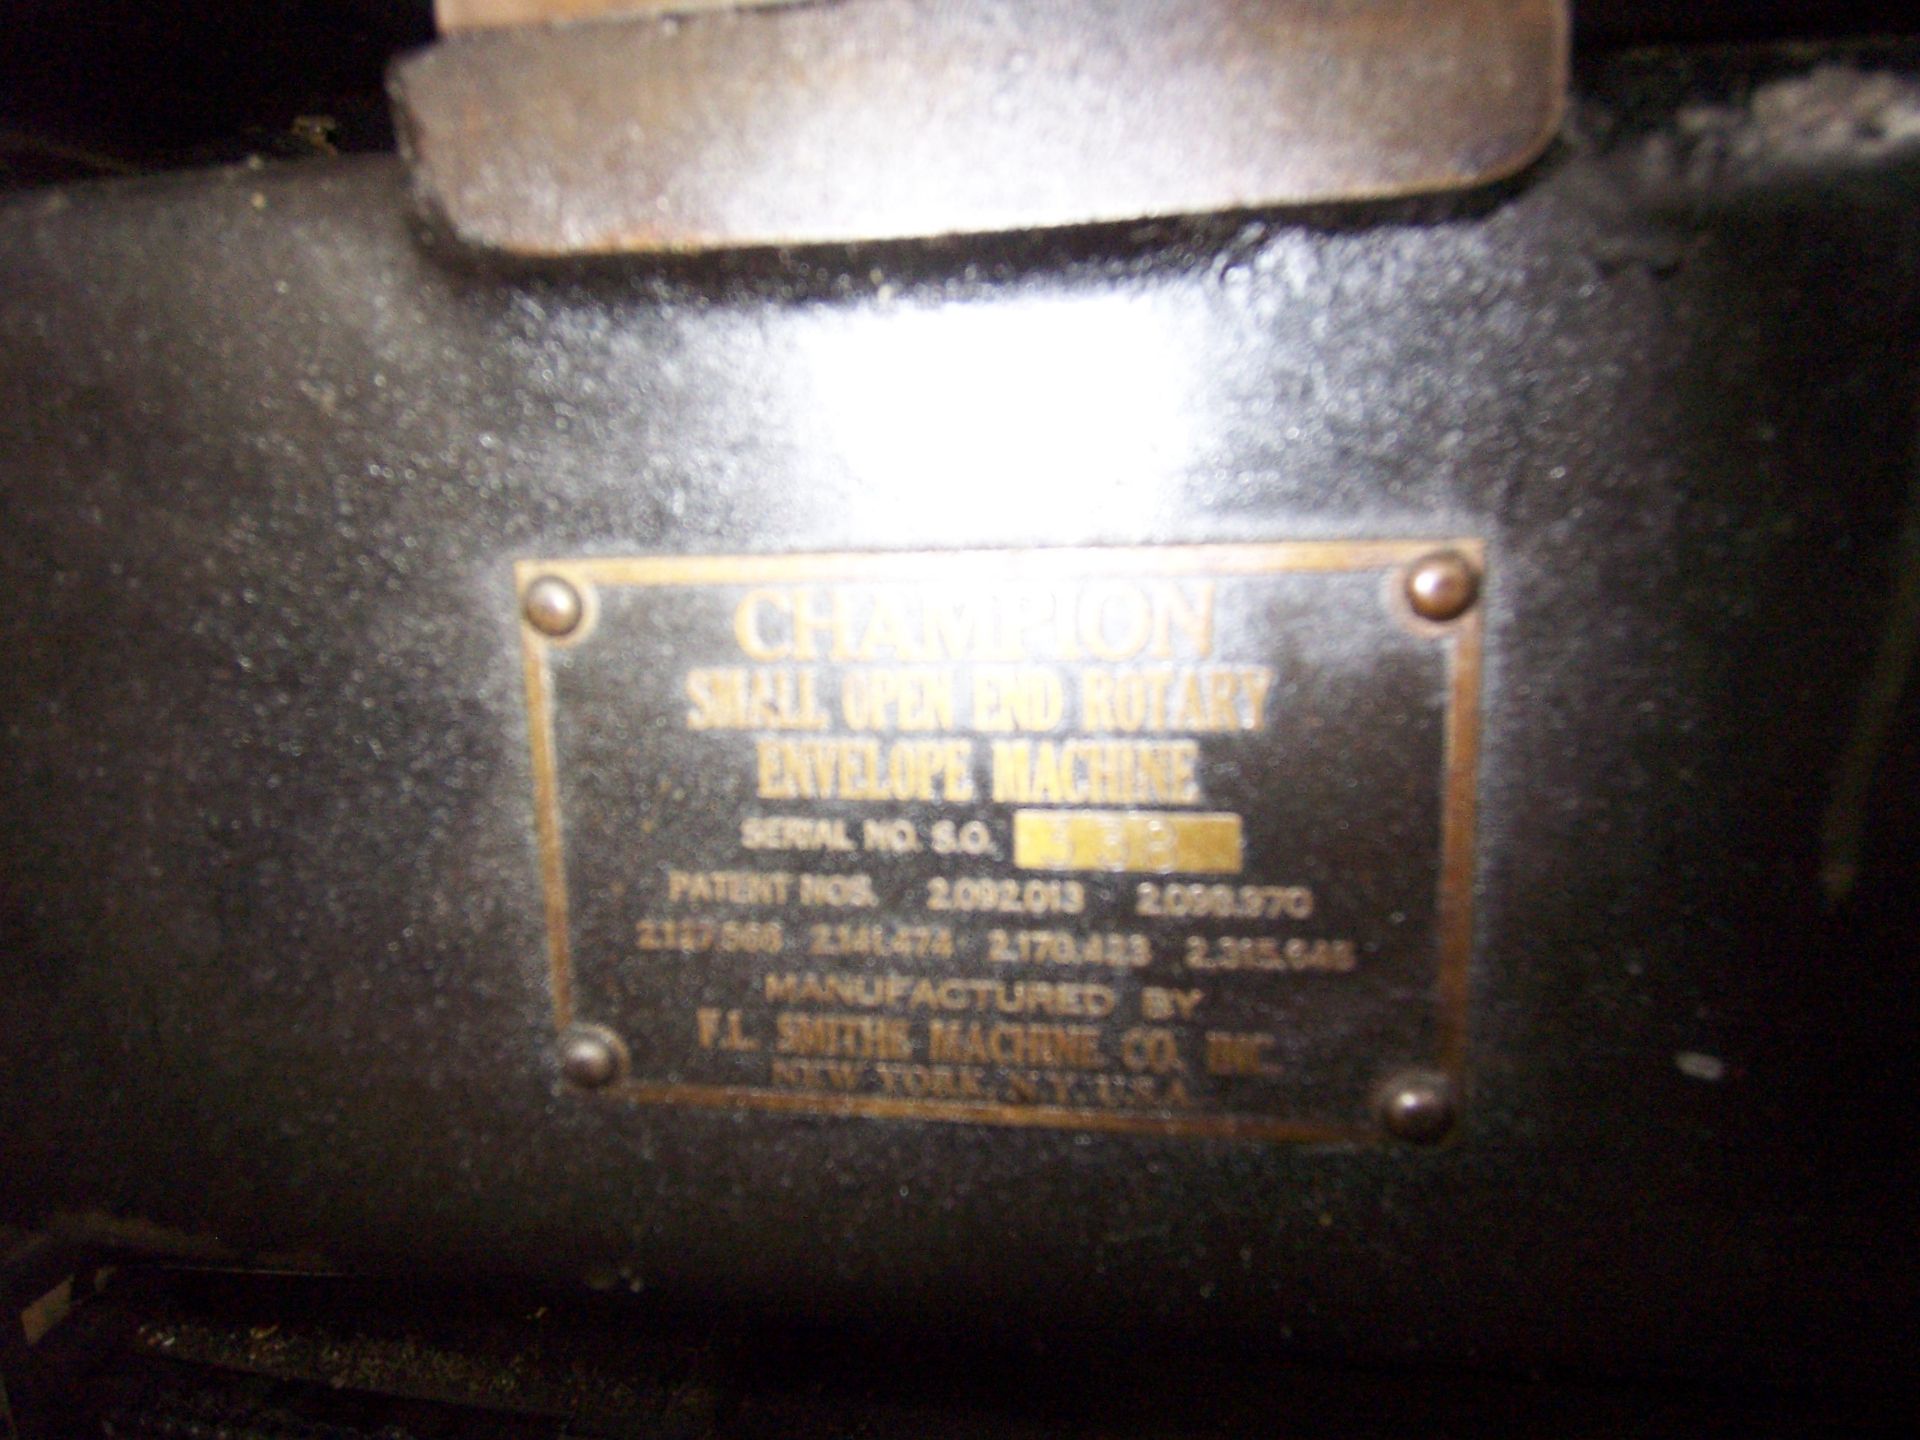 F.L. SMITHE CHAMPION S.O. SMALL OPEN END ROTARY ENVELOPE MACHINE, S/N: 338 - Image 5 of 6